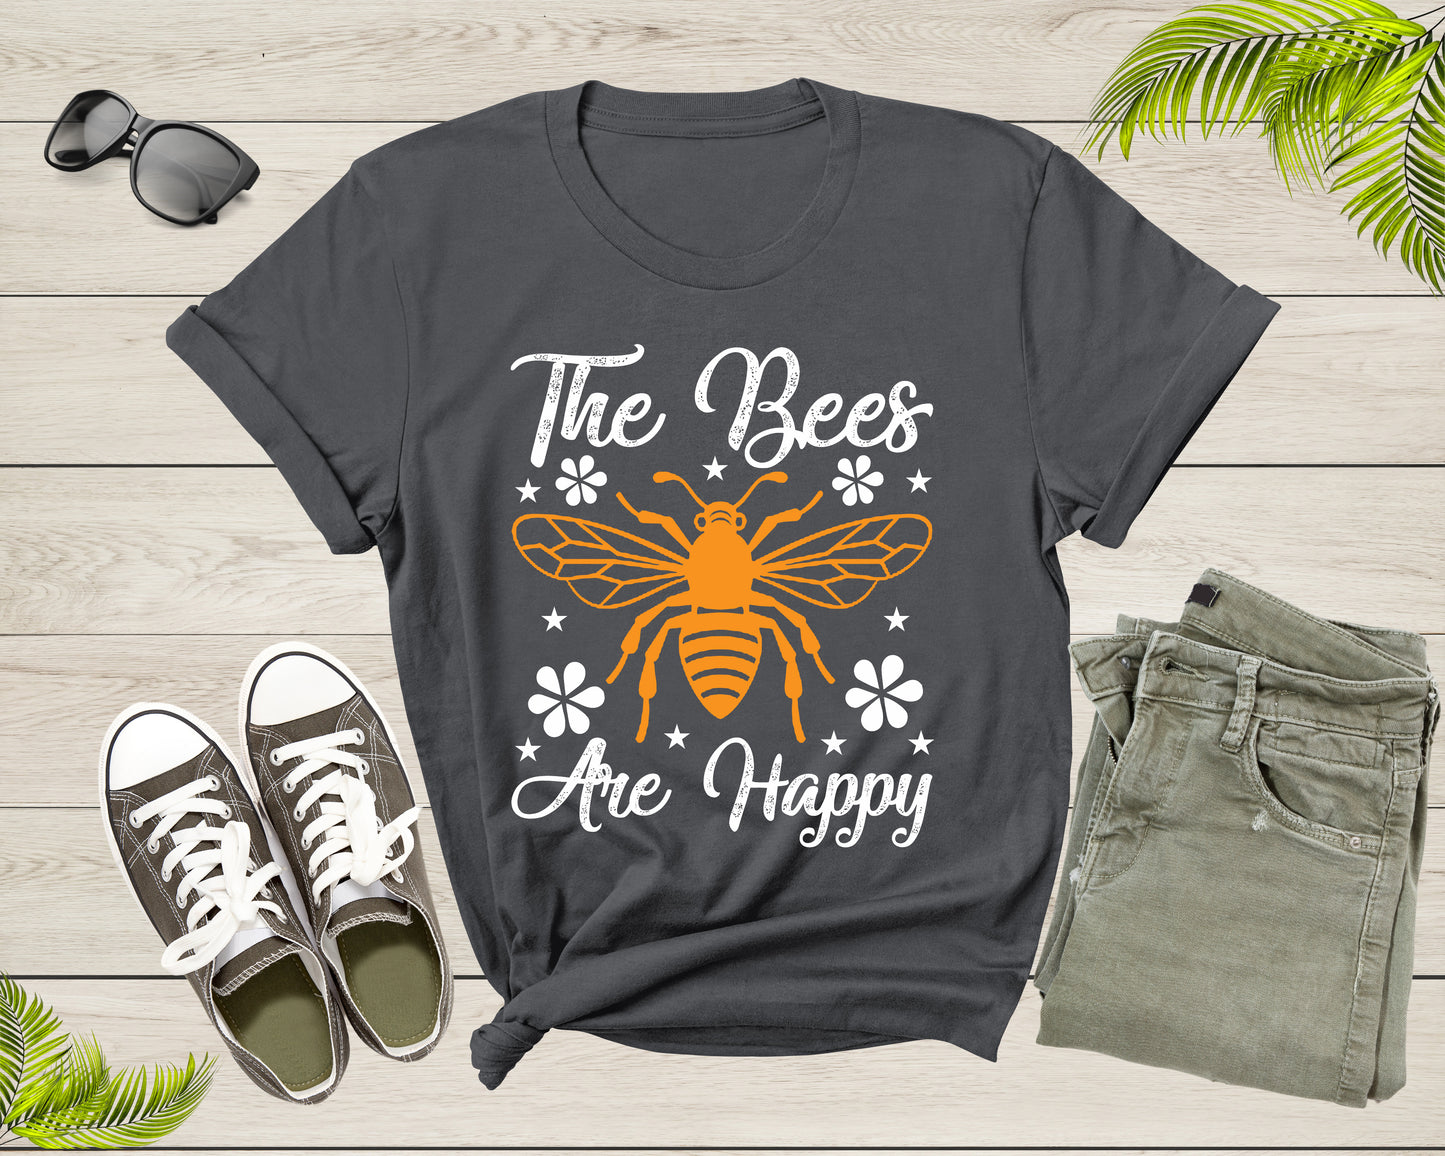 Bee Lover Gift for Beekeepers Bumblebee Birthday Men Women T-Shirt Save the Bees Shirt Honey Bee Shirt Beekeeper Shirt Bee Lover Shirt